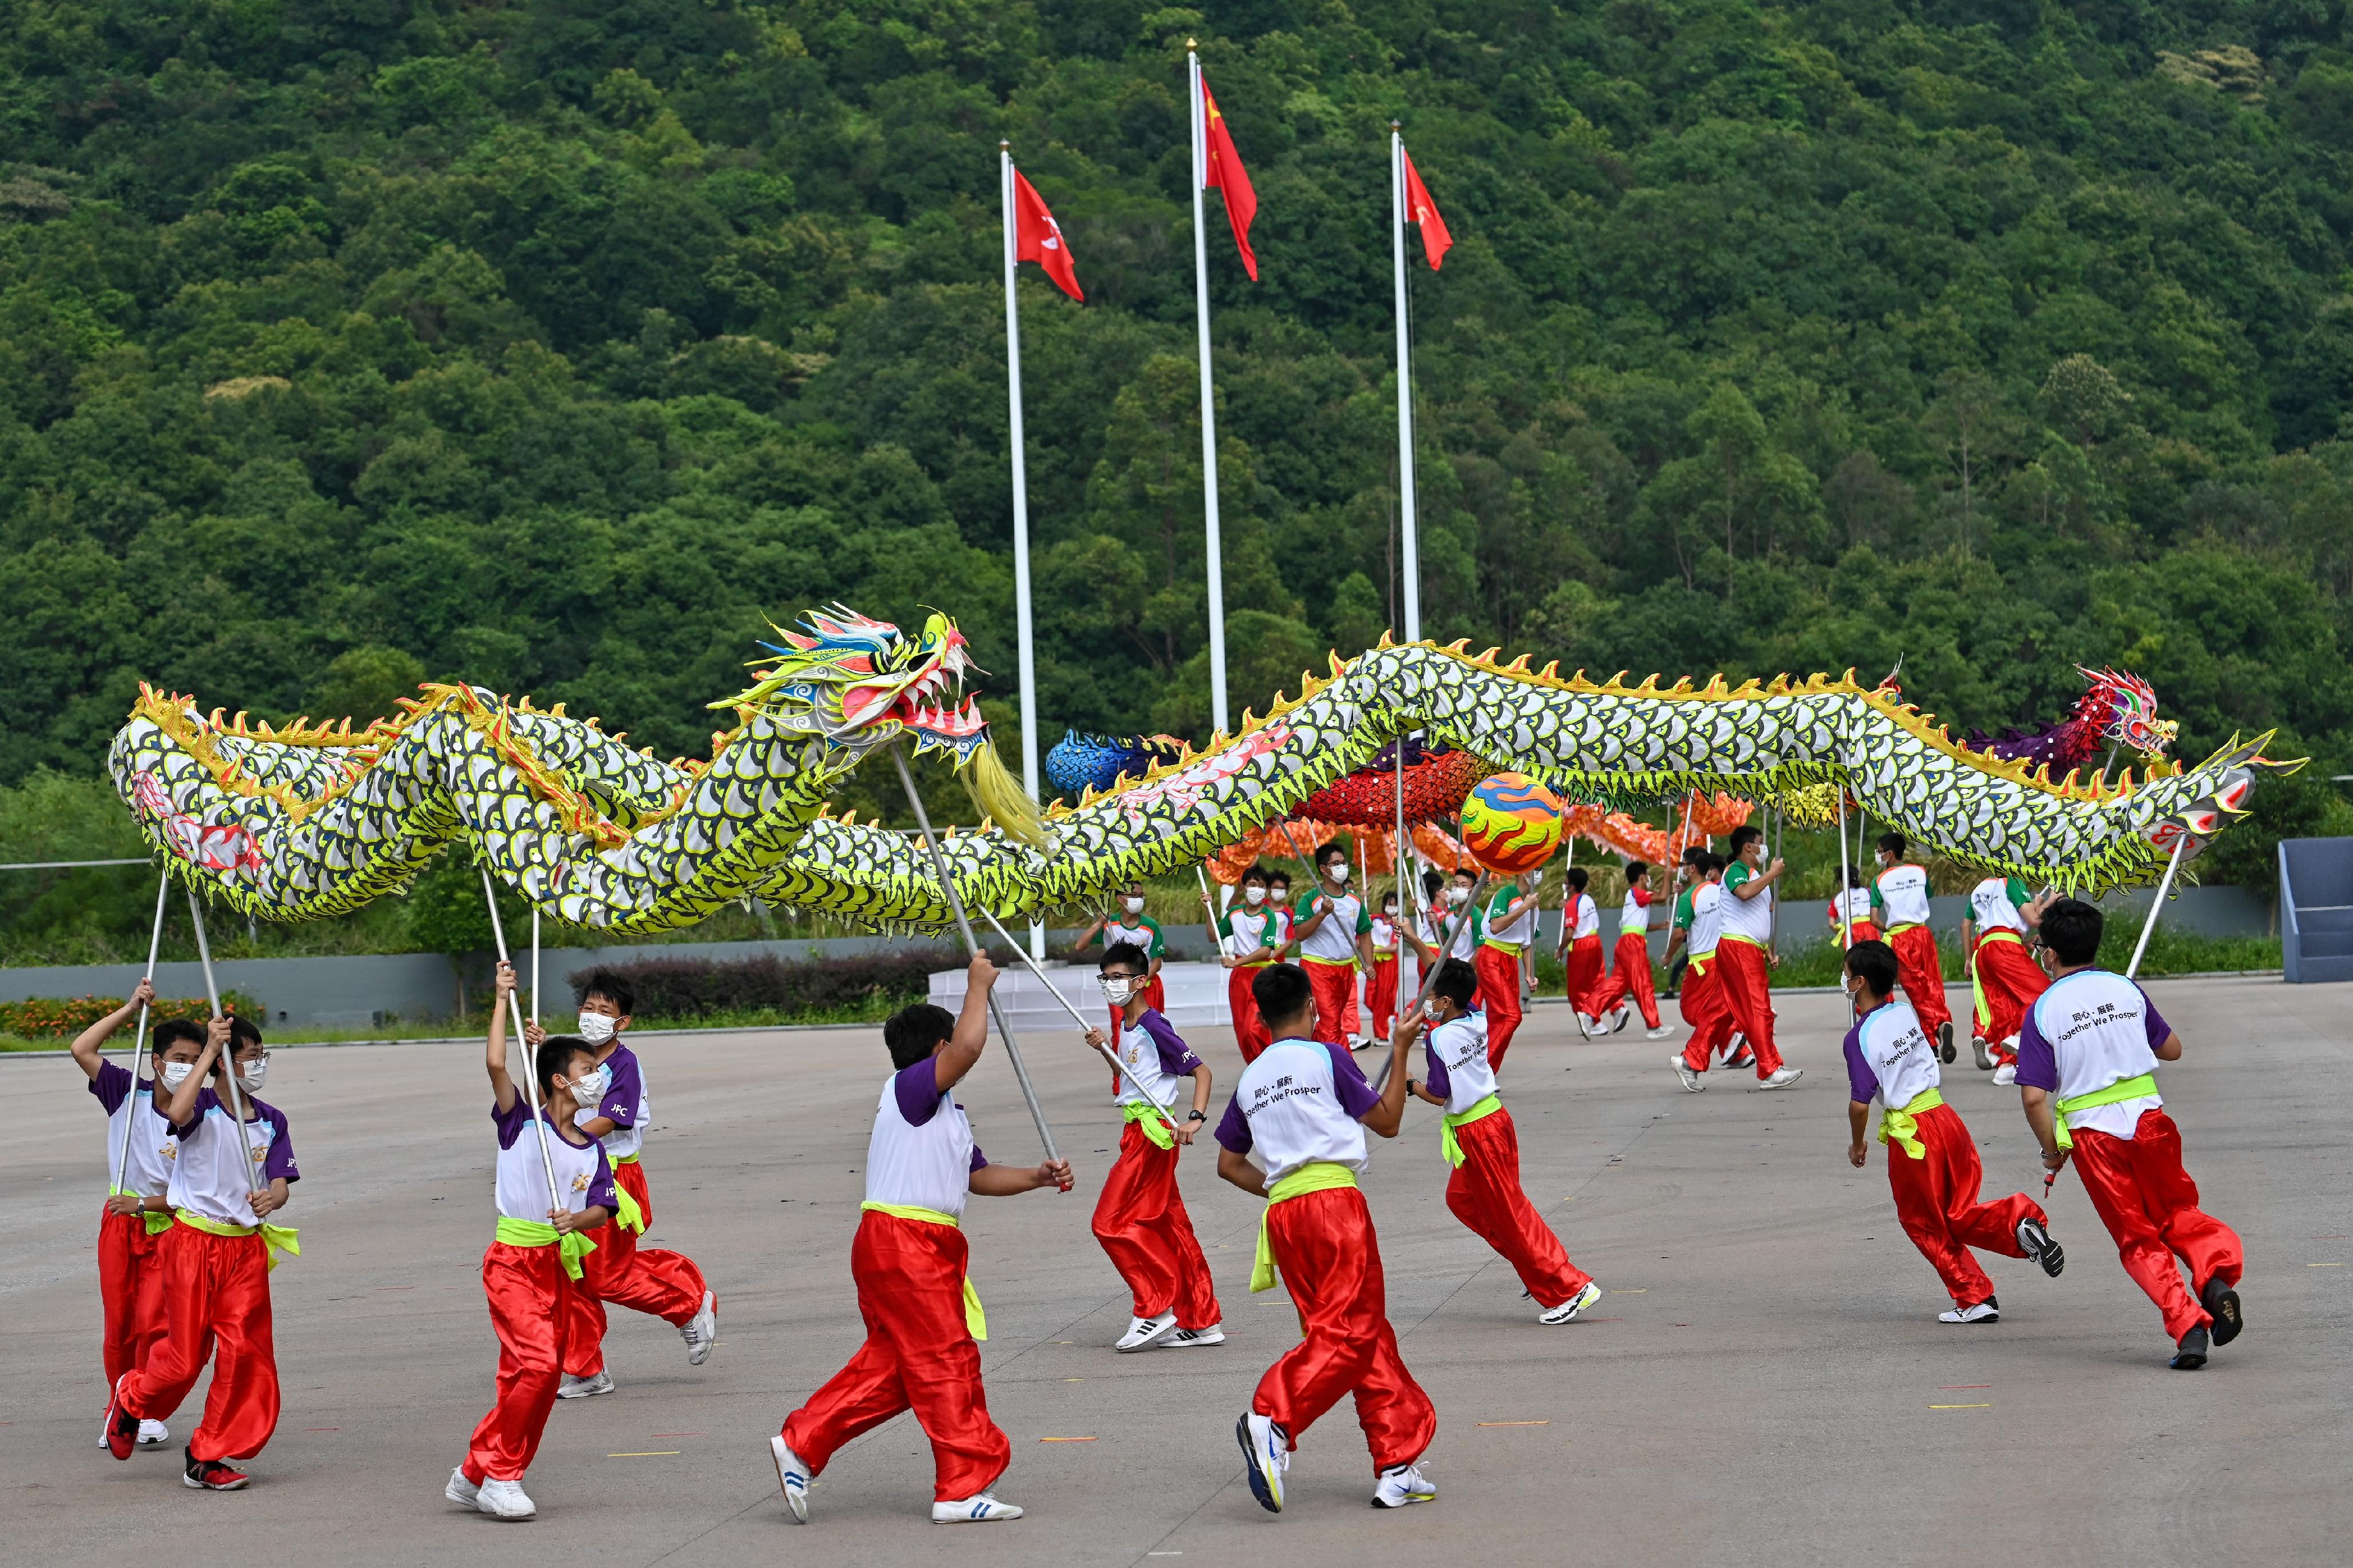 The Security Bureau led the disciplined services, auxiliary services and nine youth groups to hold the "Together We Prosper" Grand Parade by Disciplined Services and Youth Groups for Celebrating the 73rd Anniversary of the Founding of the People’s Republic of China and the 25th Anniversary of the Establishment of the Hong Kong Special Administrative Region at the Fire and Ambulance Services Academy in Tseung Kwan O today (September 24). Photo shows various youth groups performing dragon and lion dances.